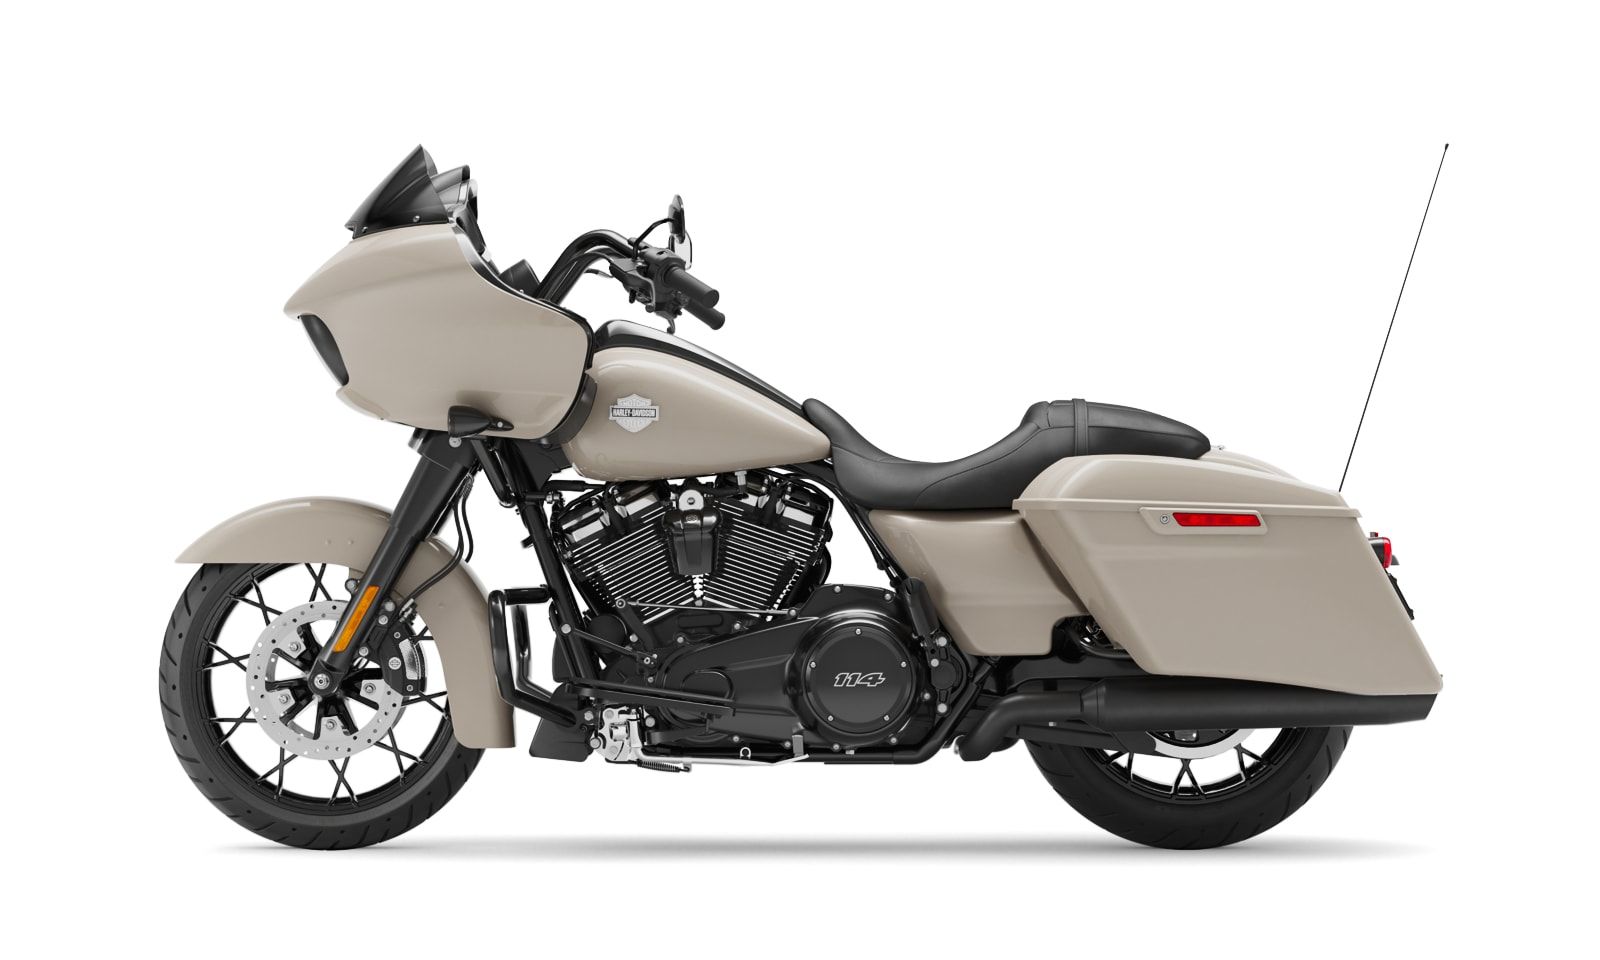 2022 Harley-Davidson Road Glide Special in New London, Connecticut - Photo 5